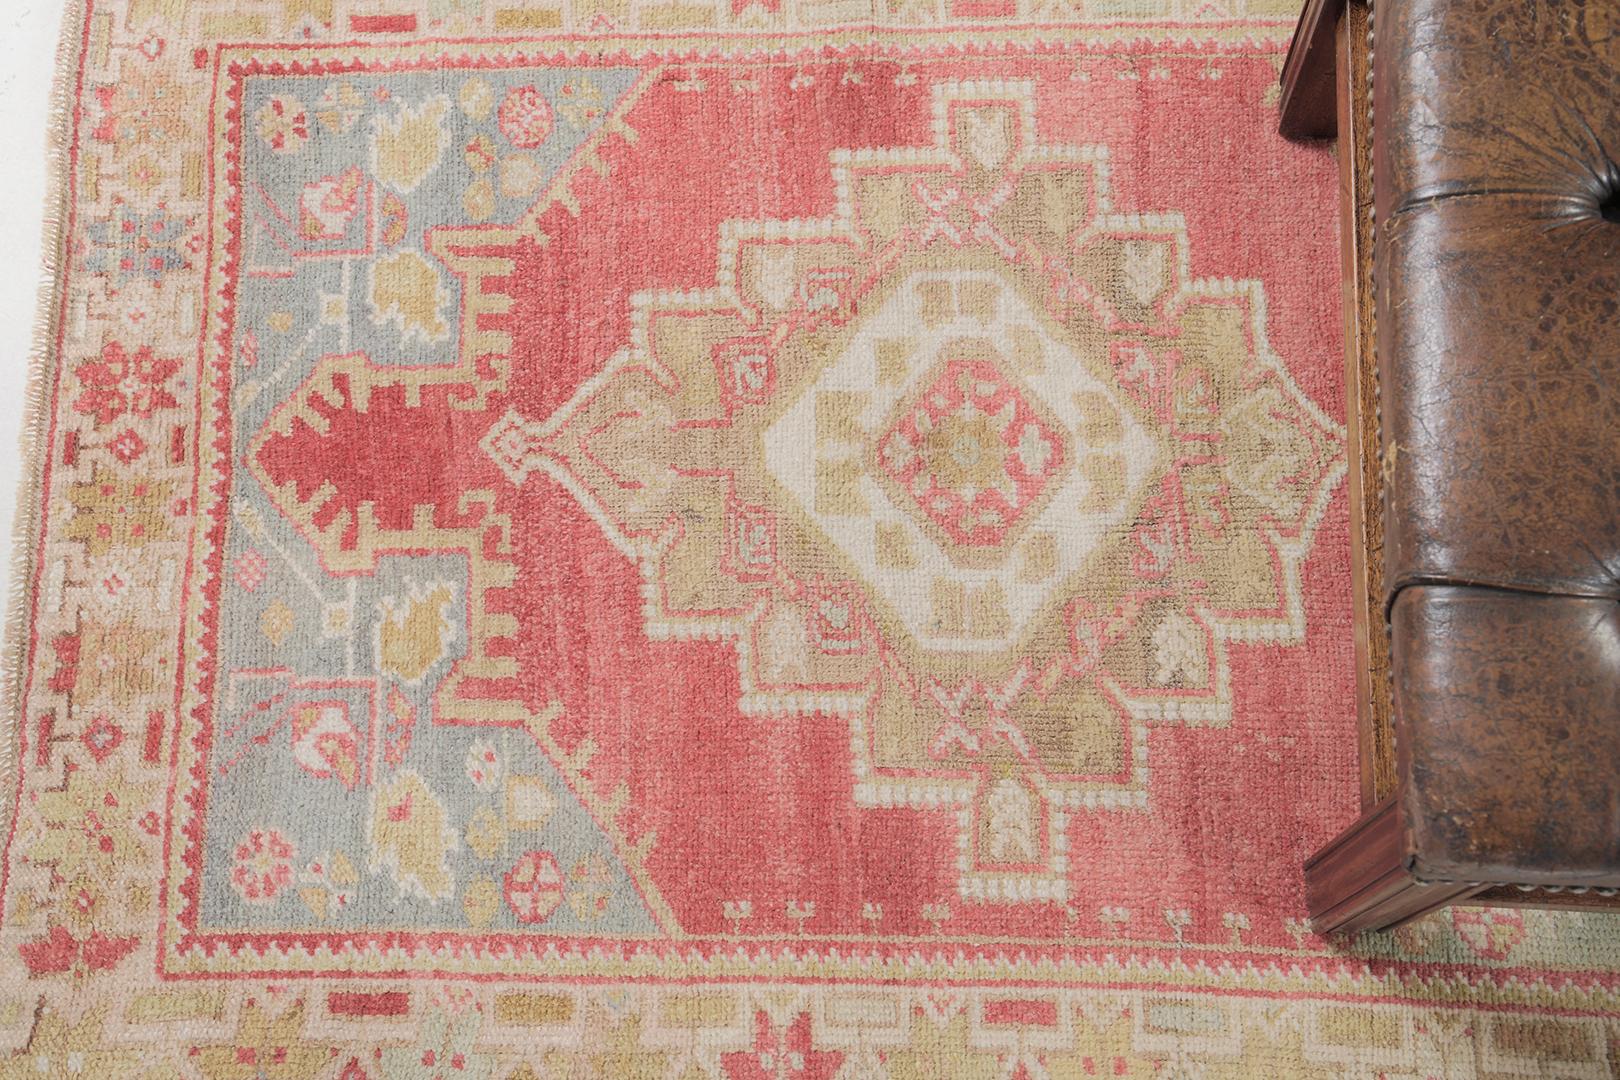 Maden is a stunning pile of woven wool that can transform your room into traditional and ethnic interiors. Know their history while turning your home aesthetically. Turkish Anatolian rugs weave together dyes and colors, motifs, textures, and